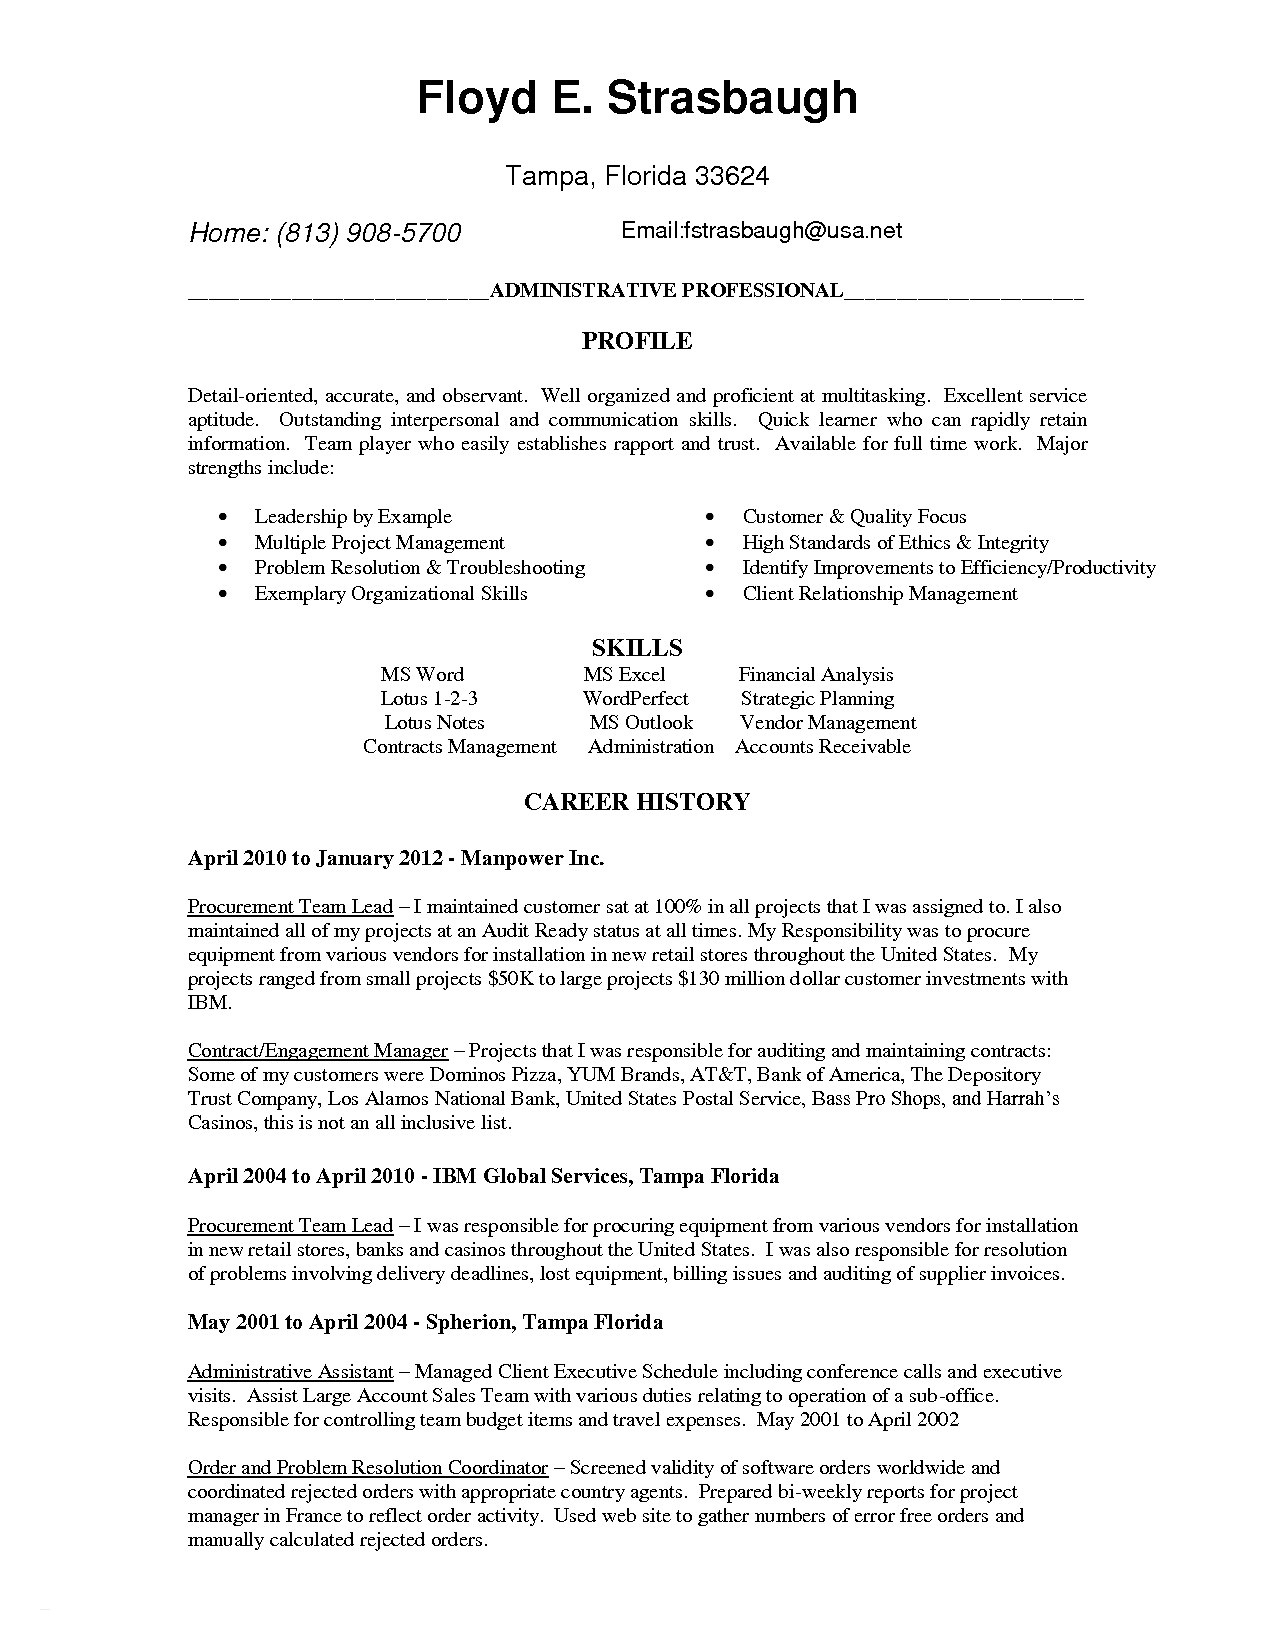 Cover Letter Template Download - Resume and Cover Letter Templates Free Download Professional Resume